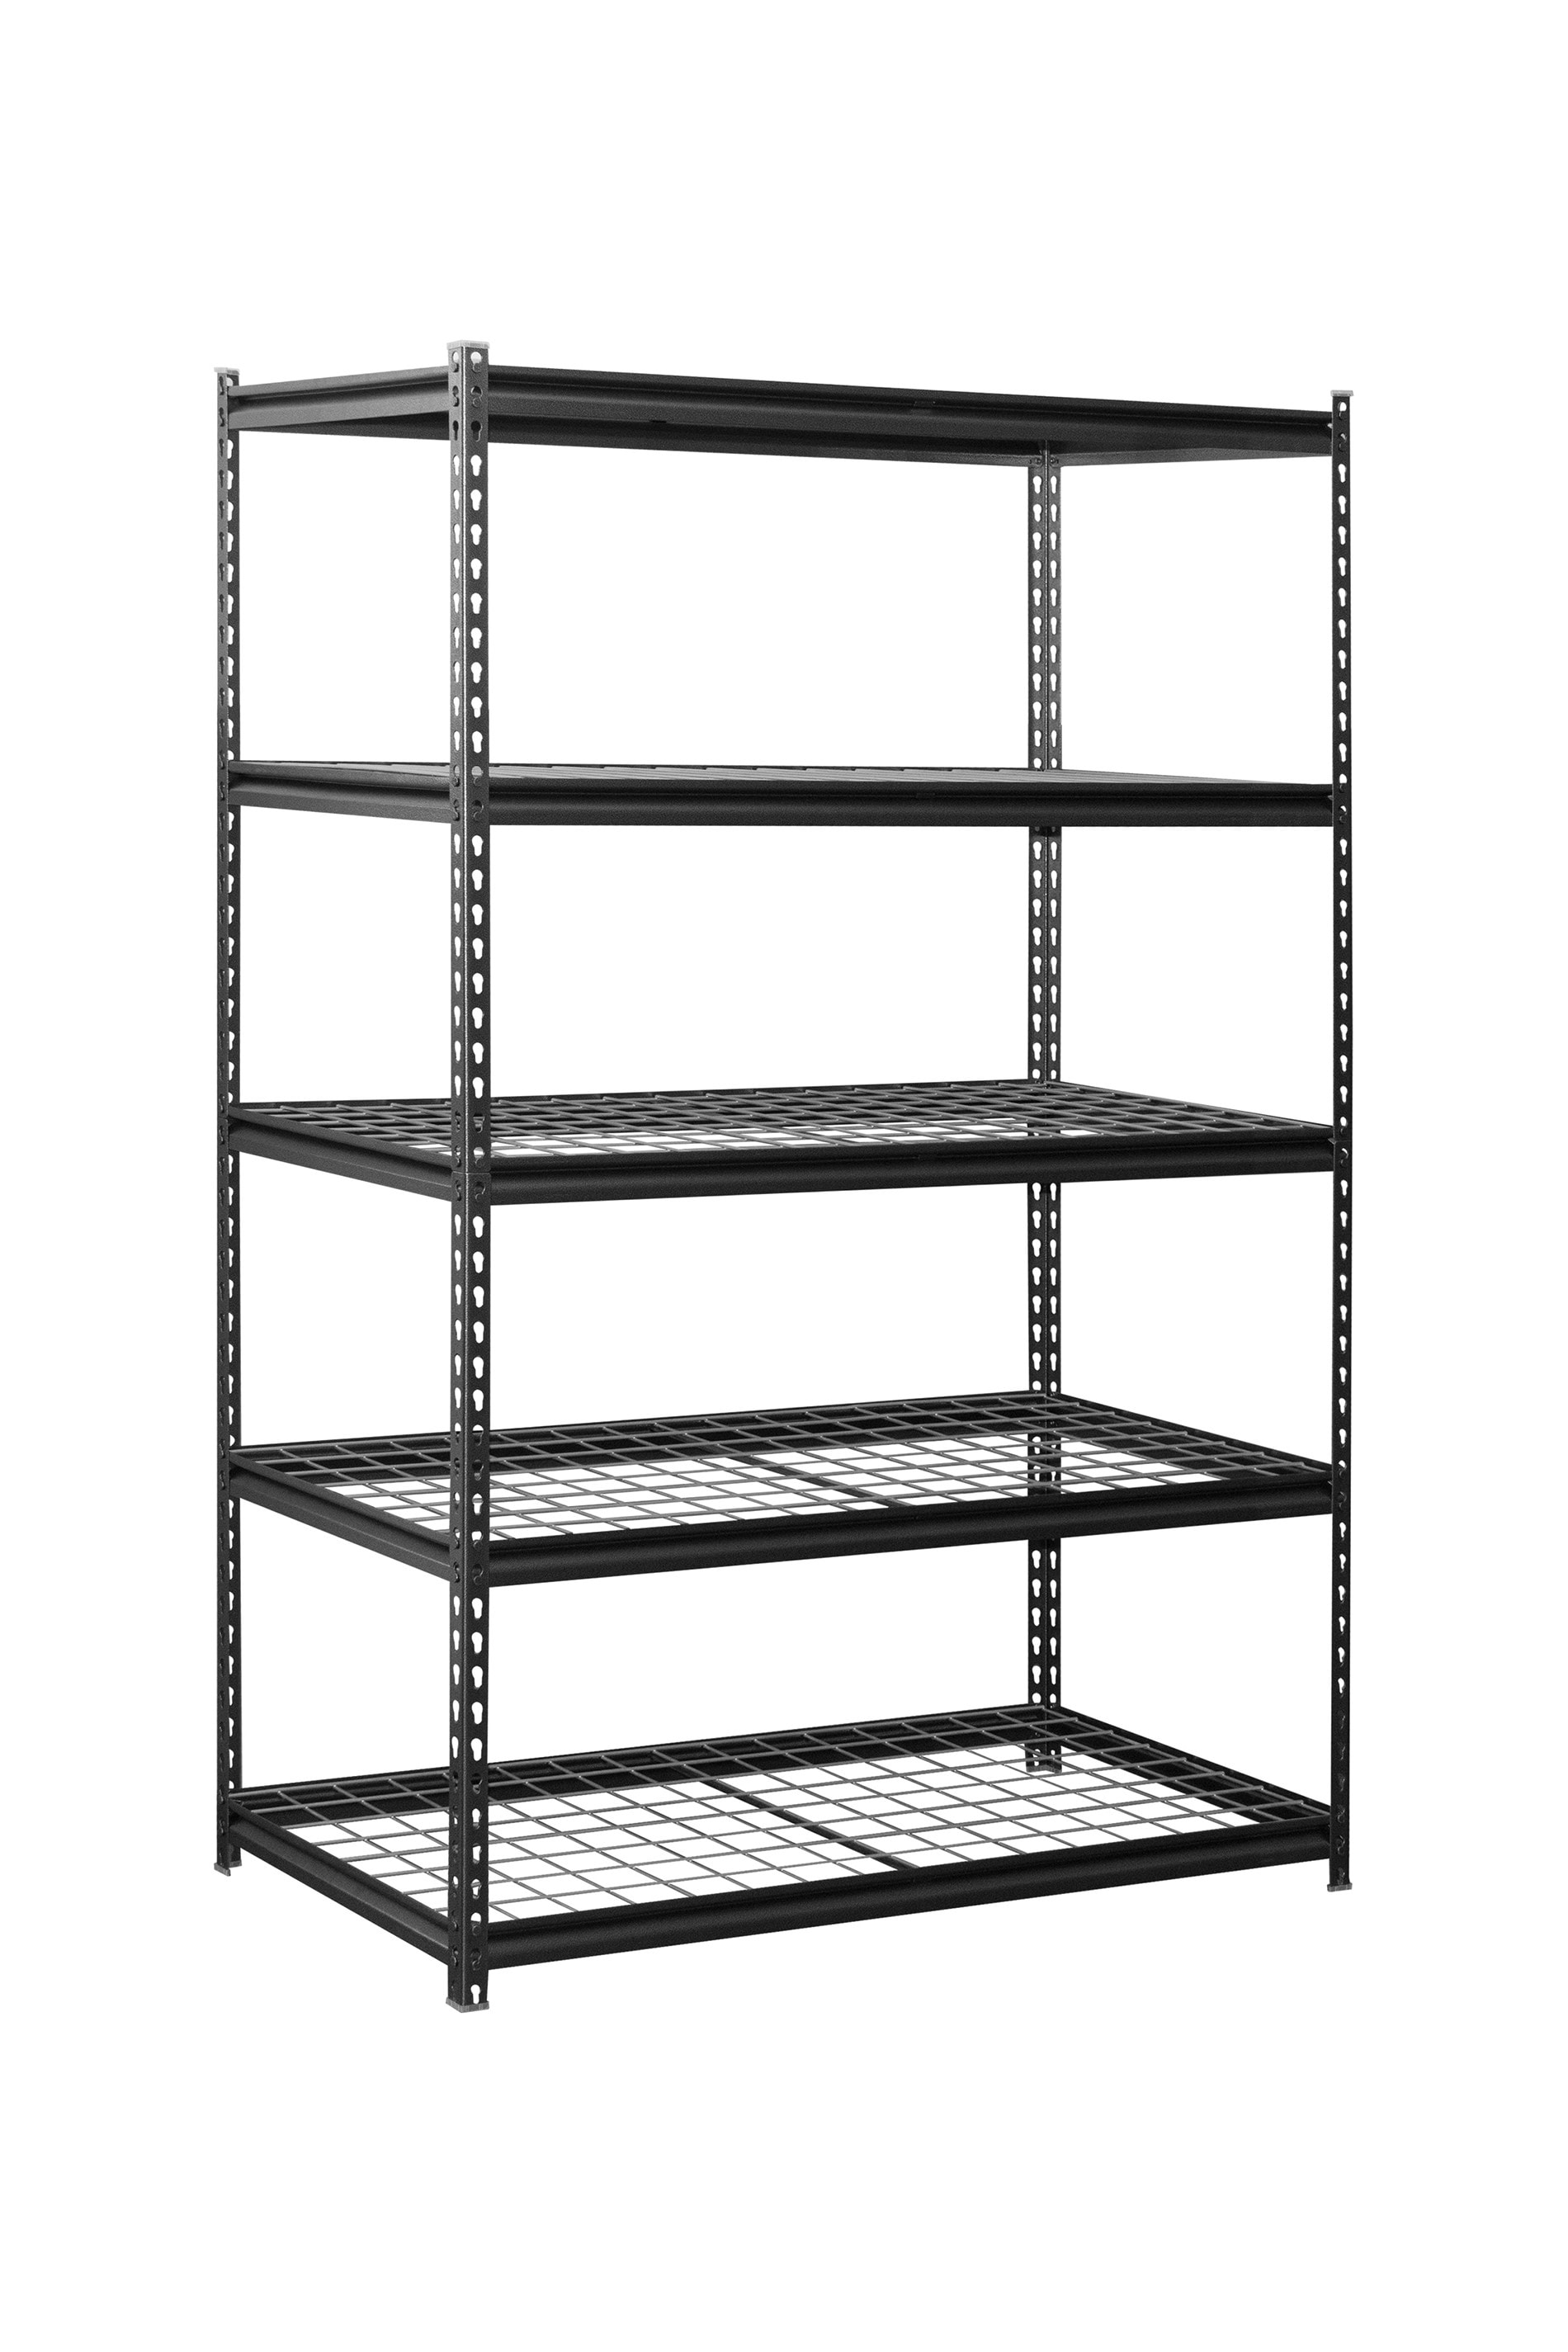 edsal Muscle Rack Steel Heavy Duty 4-Tier Utility (84-in W x 24-in D x  84-in H), Gray in the Freestanding Shelving Units department at